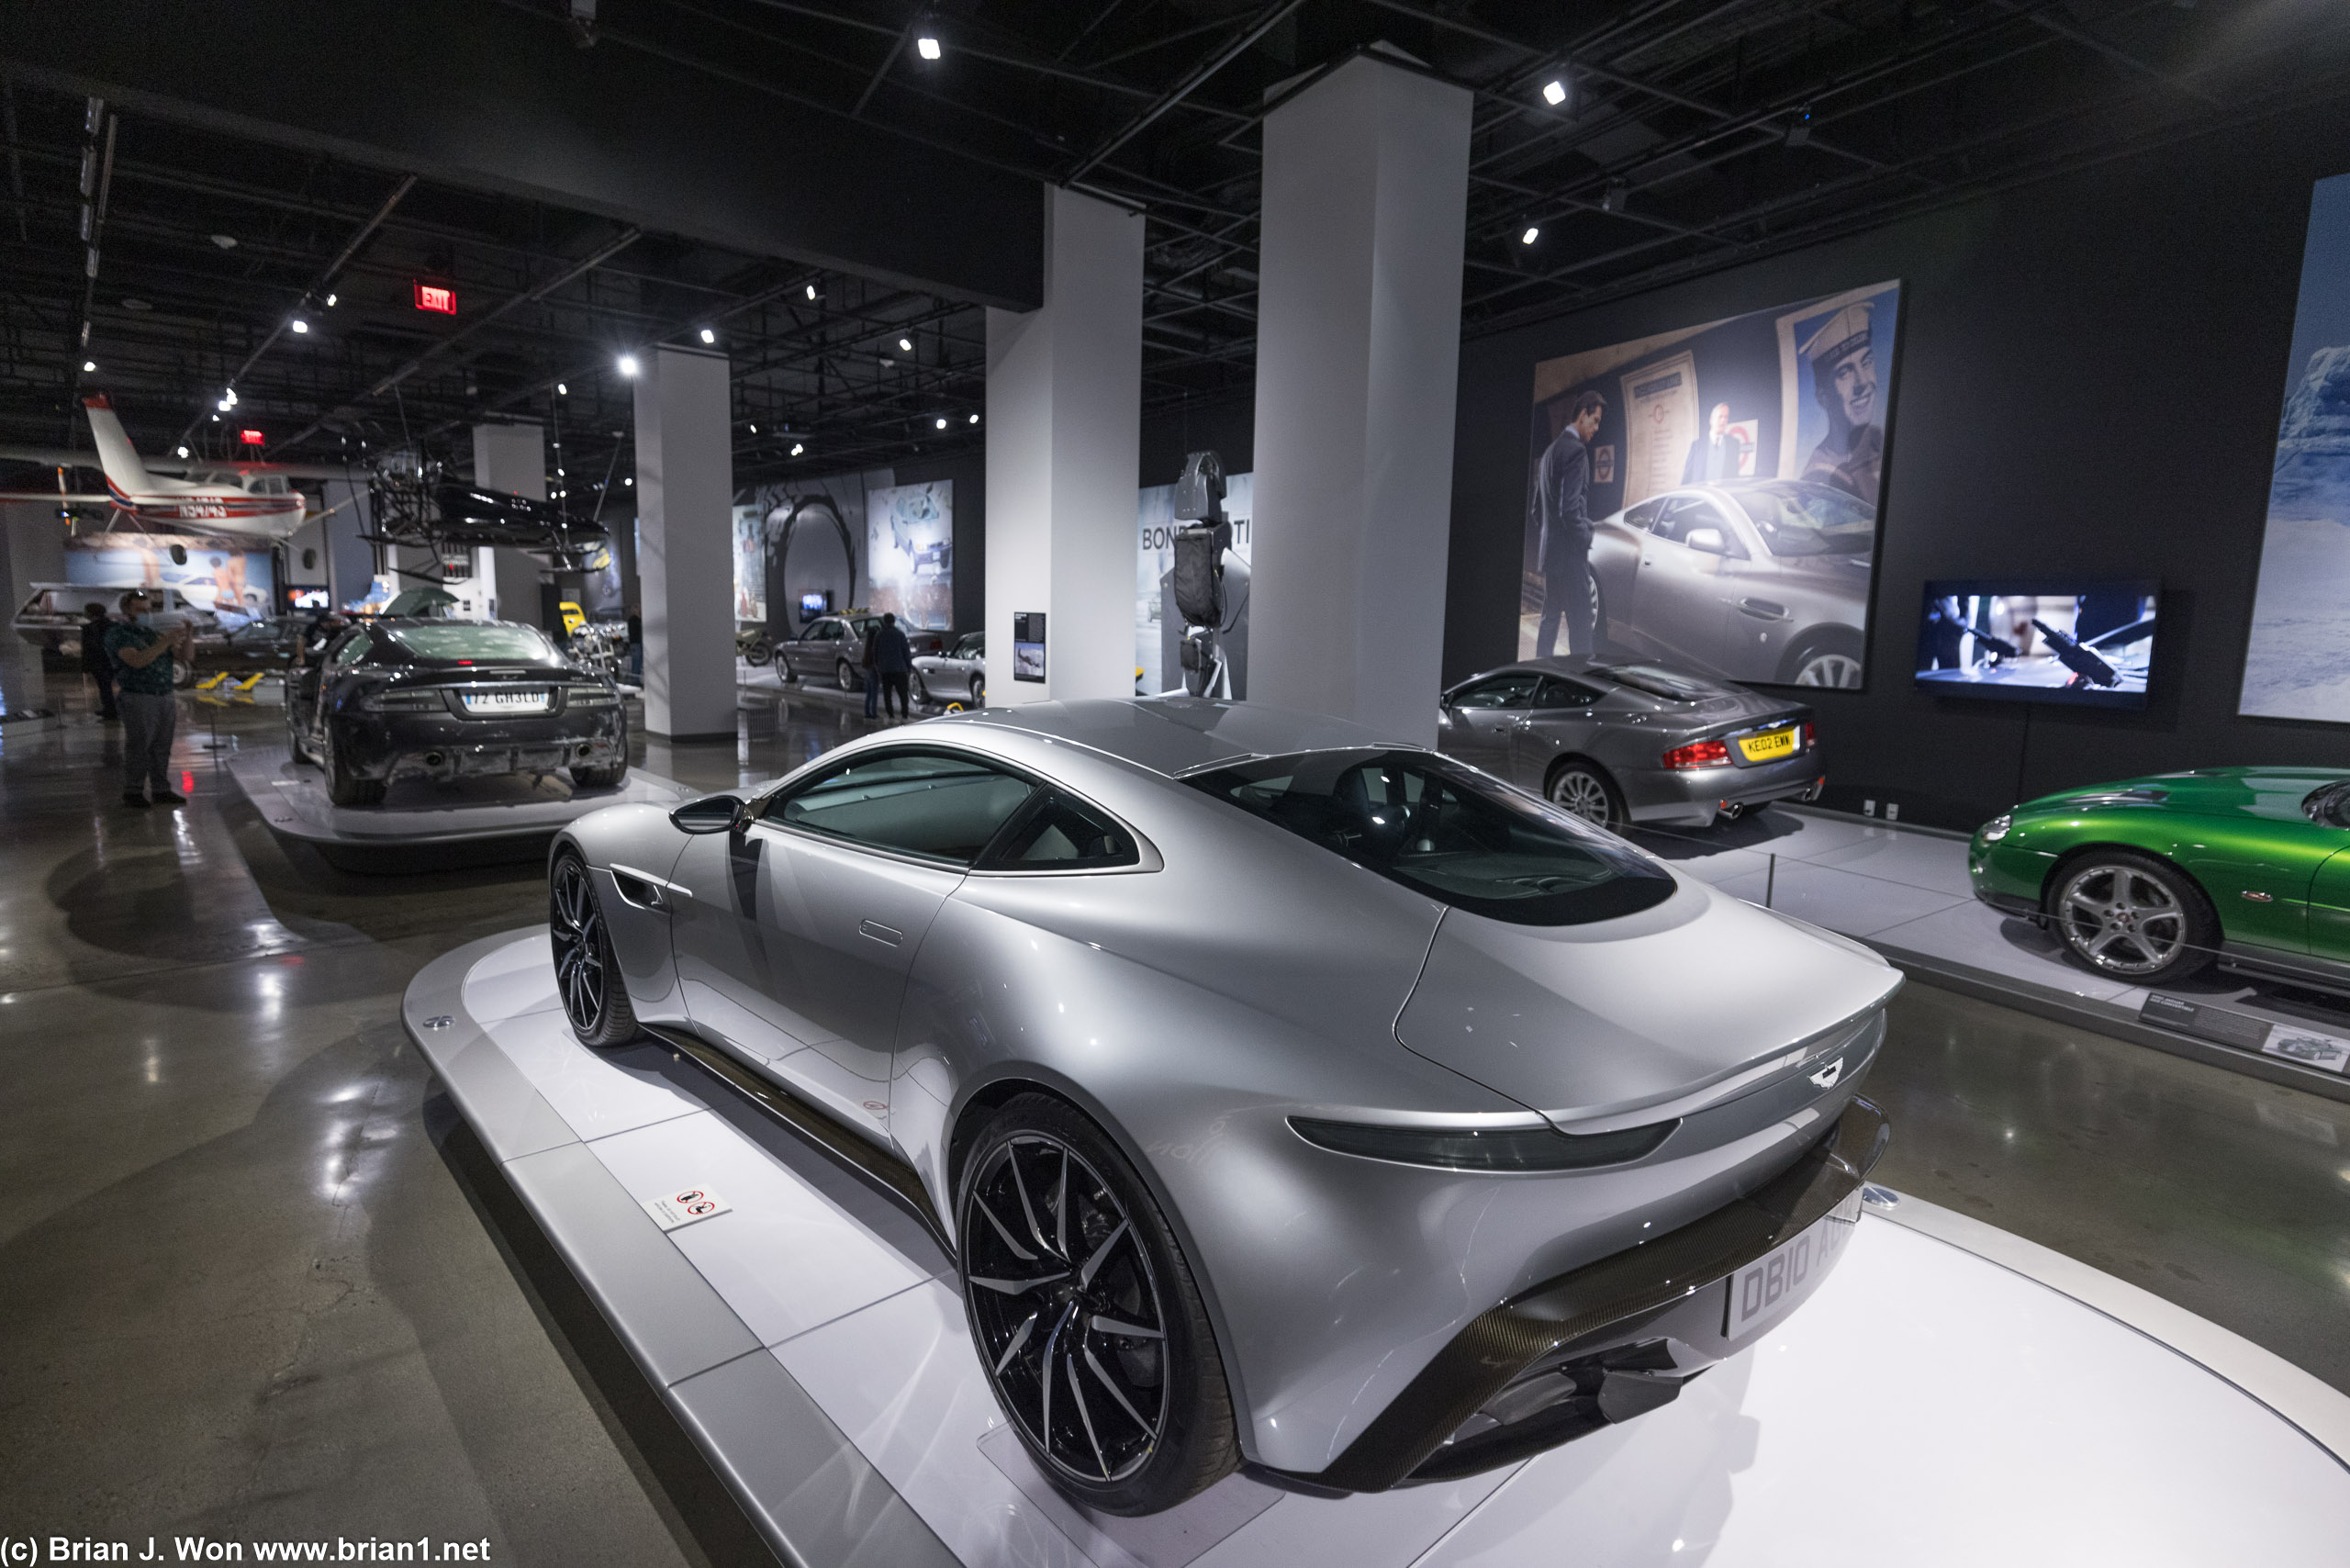 Aston Martin DB10 from Spectre in the foreground.